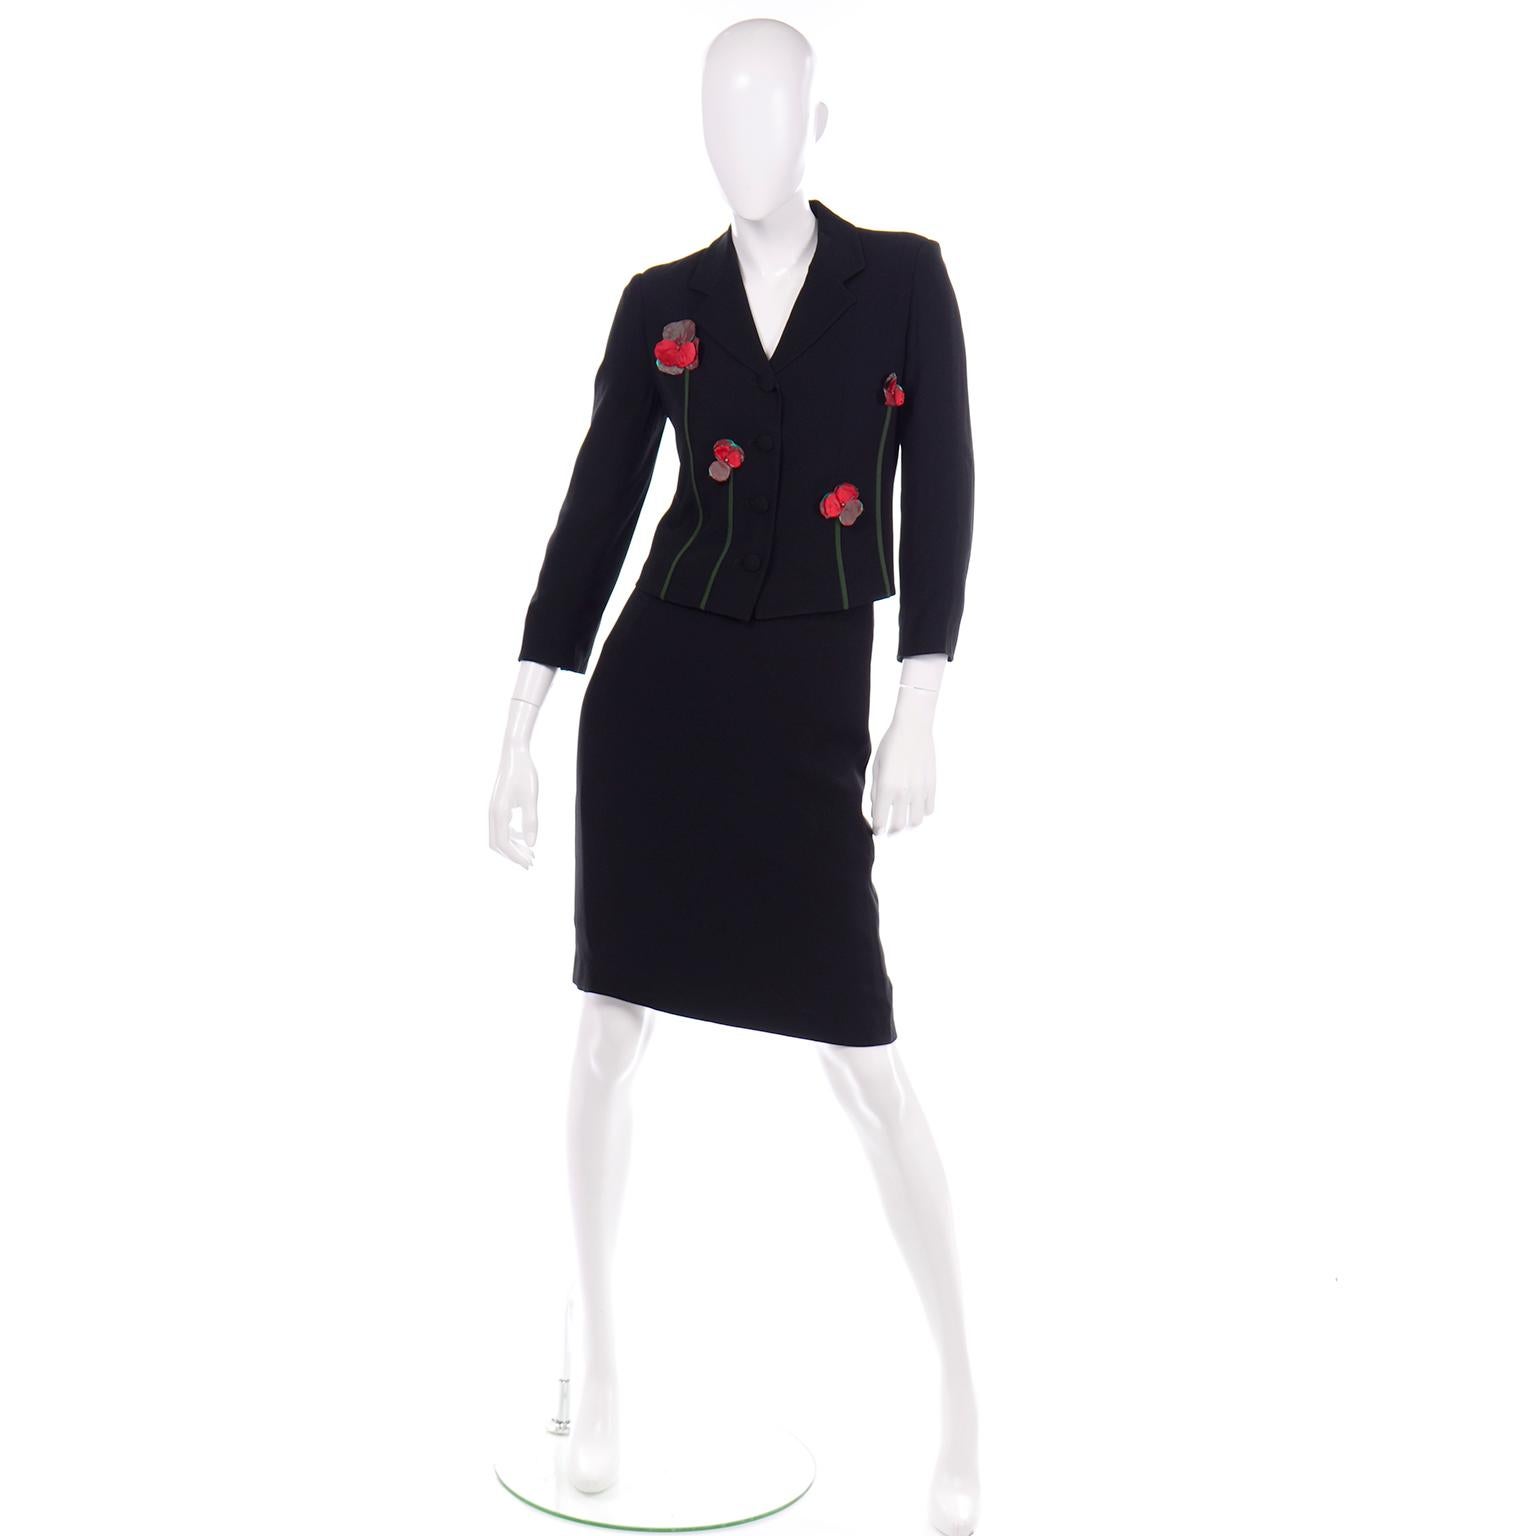 This vintage 1990's Moschino black skirt suit has beautiful iridescent silk flower applique on the jacket. The colors of the applique detail are green and red. 
The jacket is cropped and fitted with shoulder pads for structure. There are fabric